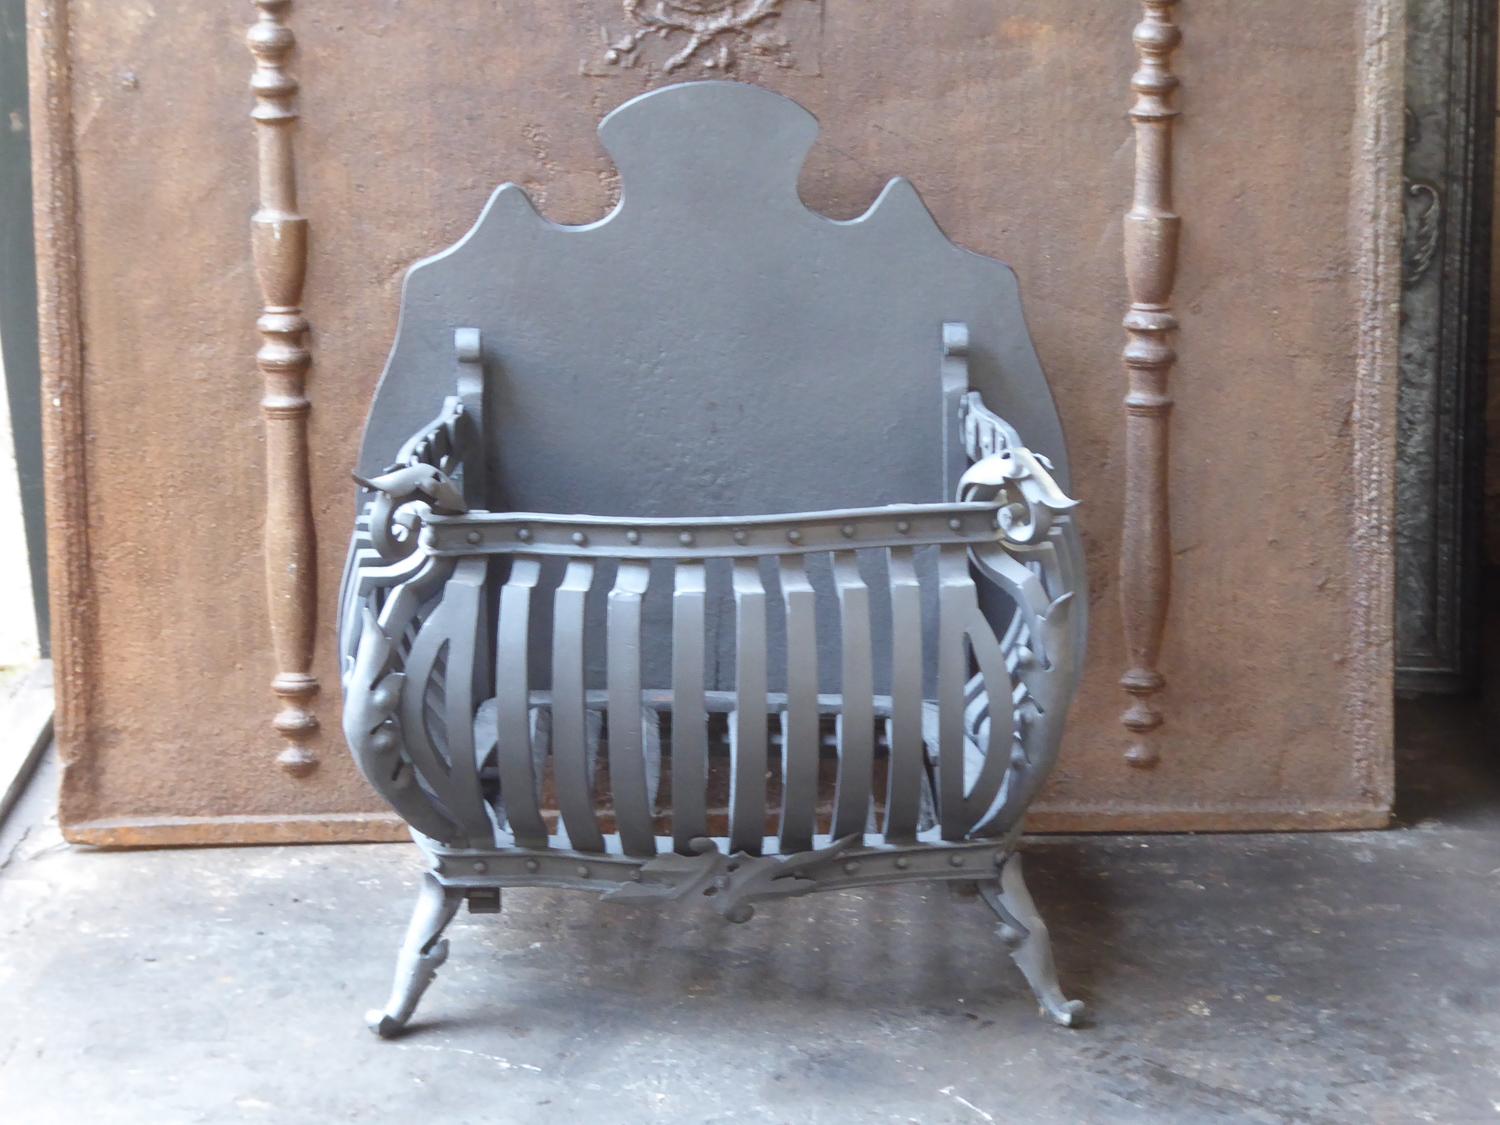 Beautifully forged Dutch Art Nouveau fireplace basket or fire basket. The fireplace grate is made of wrought iron and cast iron.

This product has to be shipped as freight due to its size and/or (volumetric) weight. You can contact us to find out